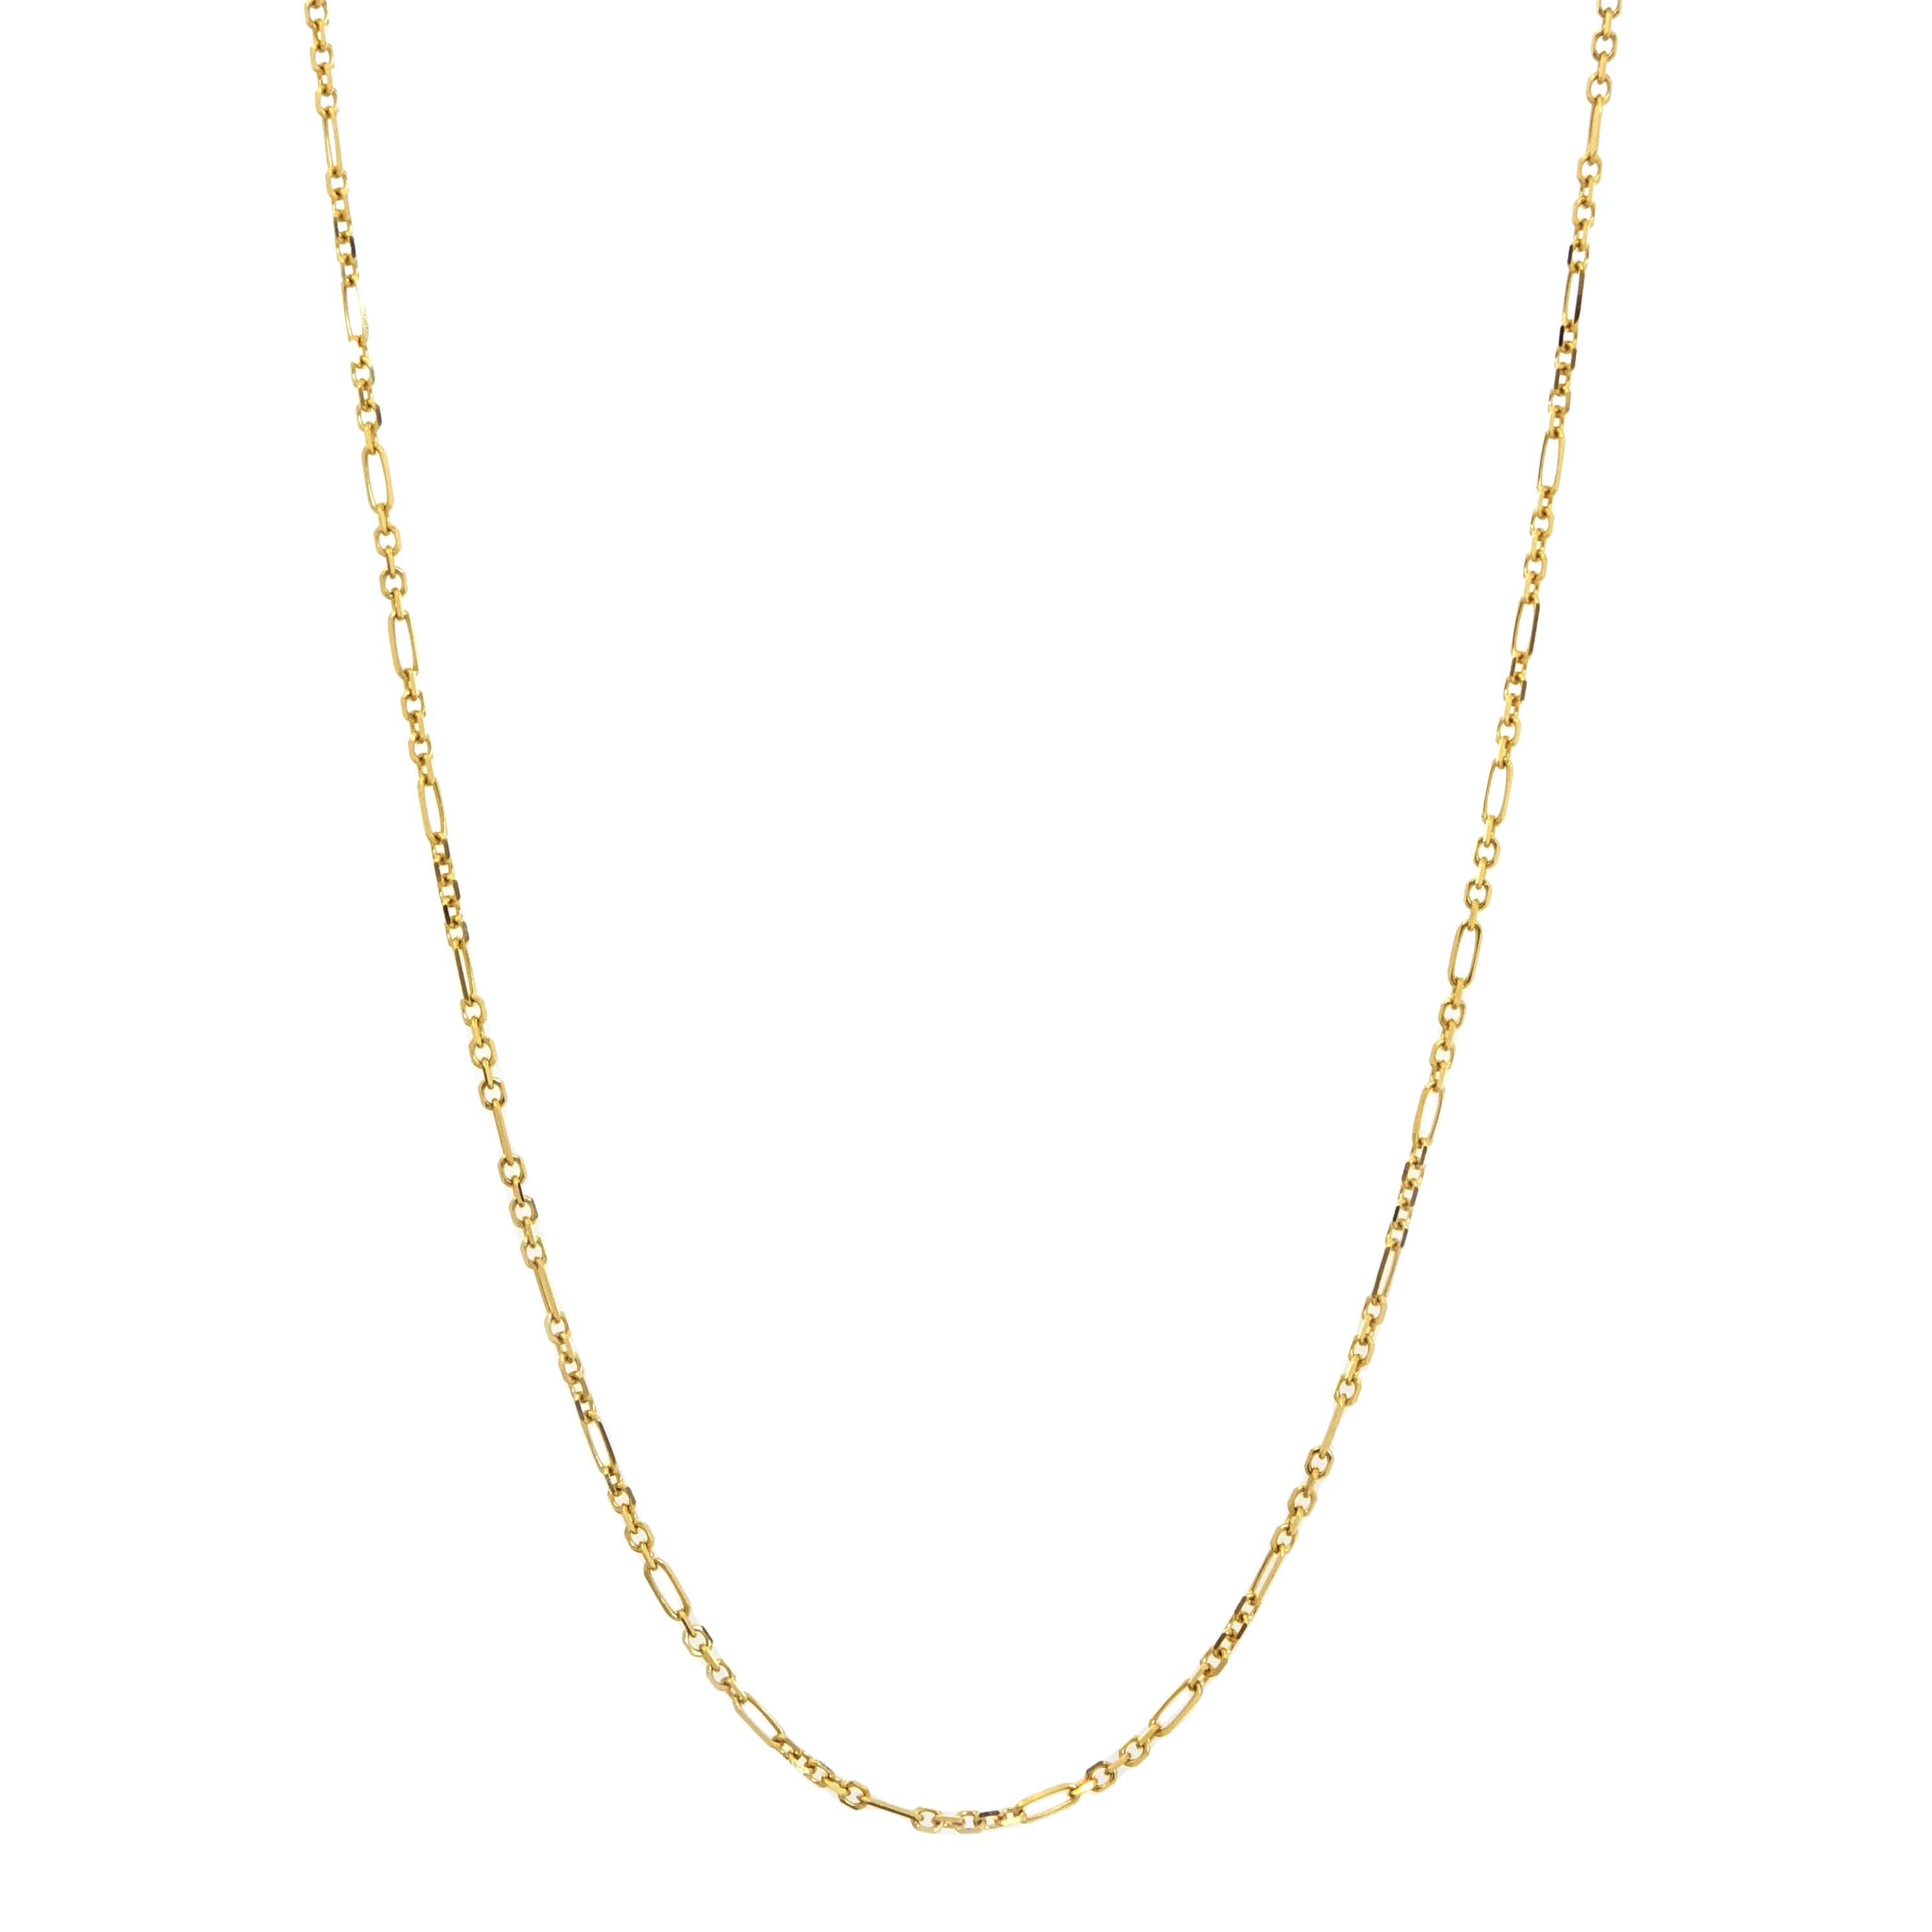 Alternating Links Chain Necklace